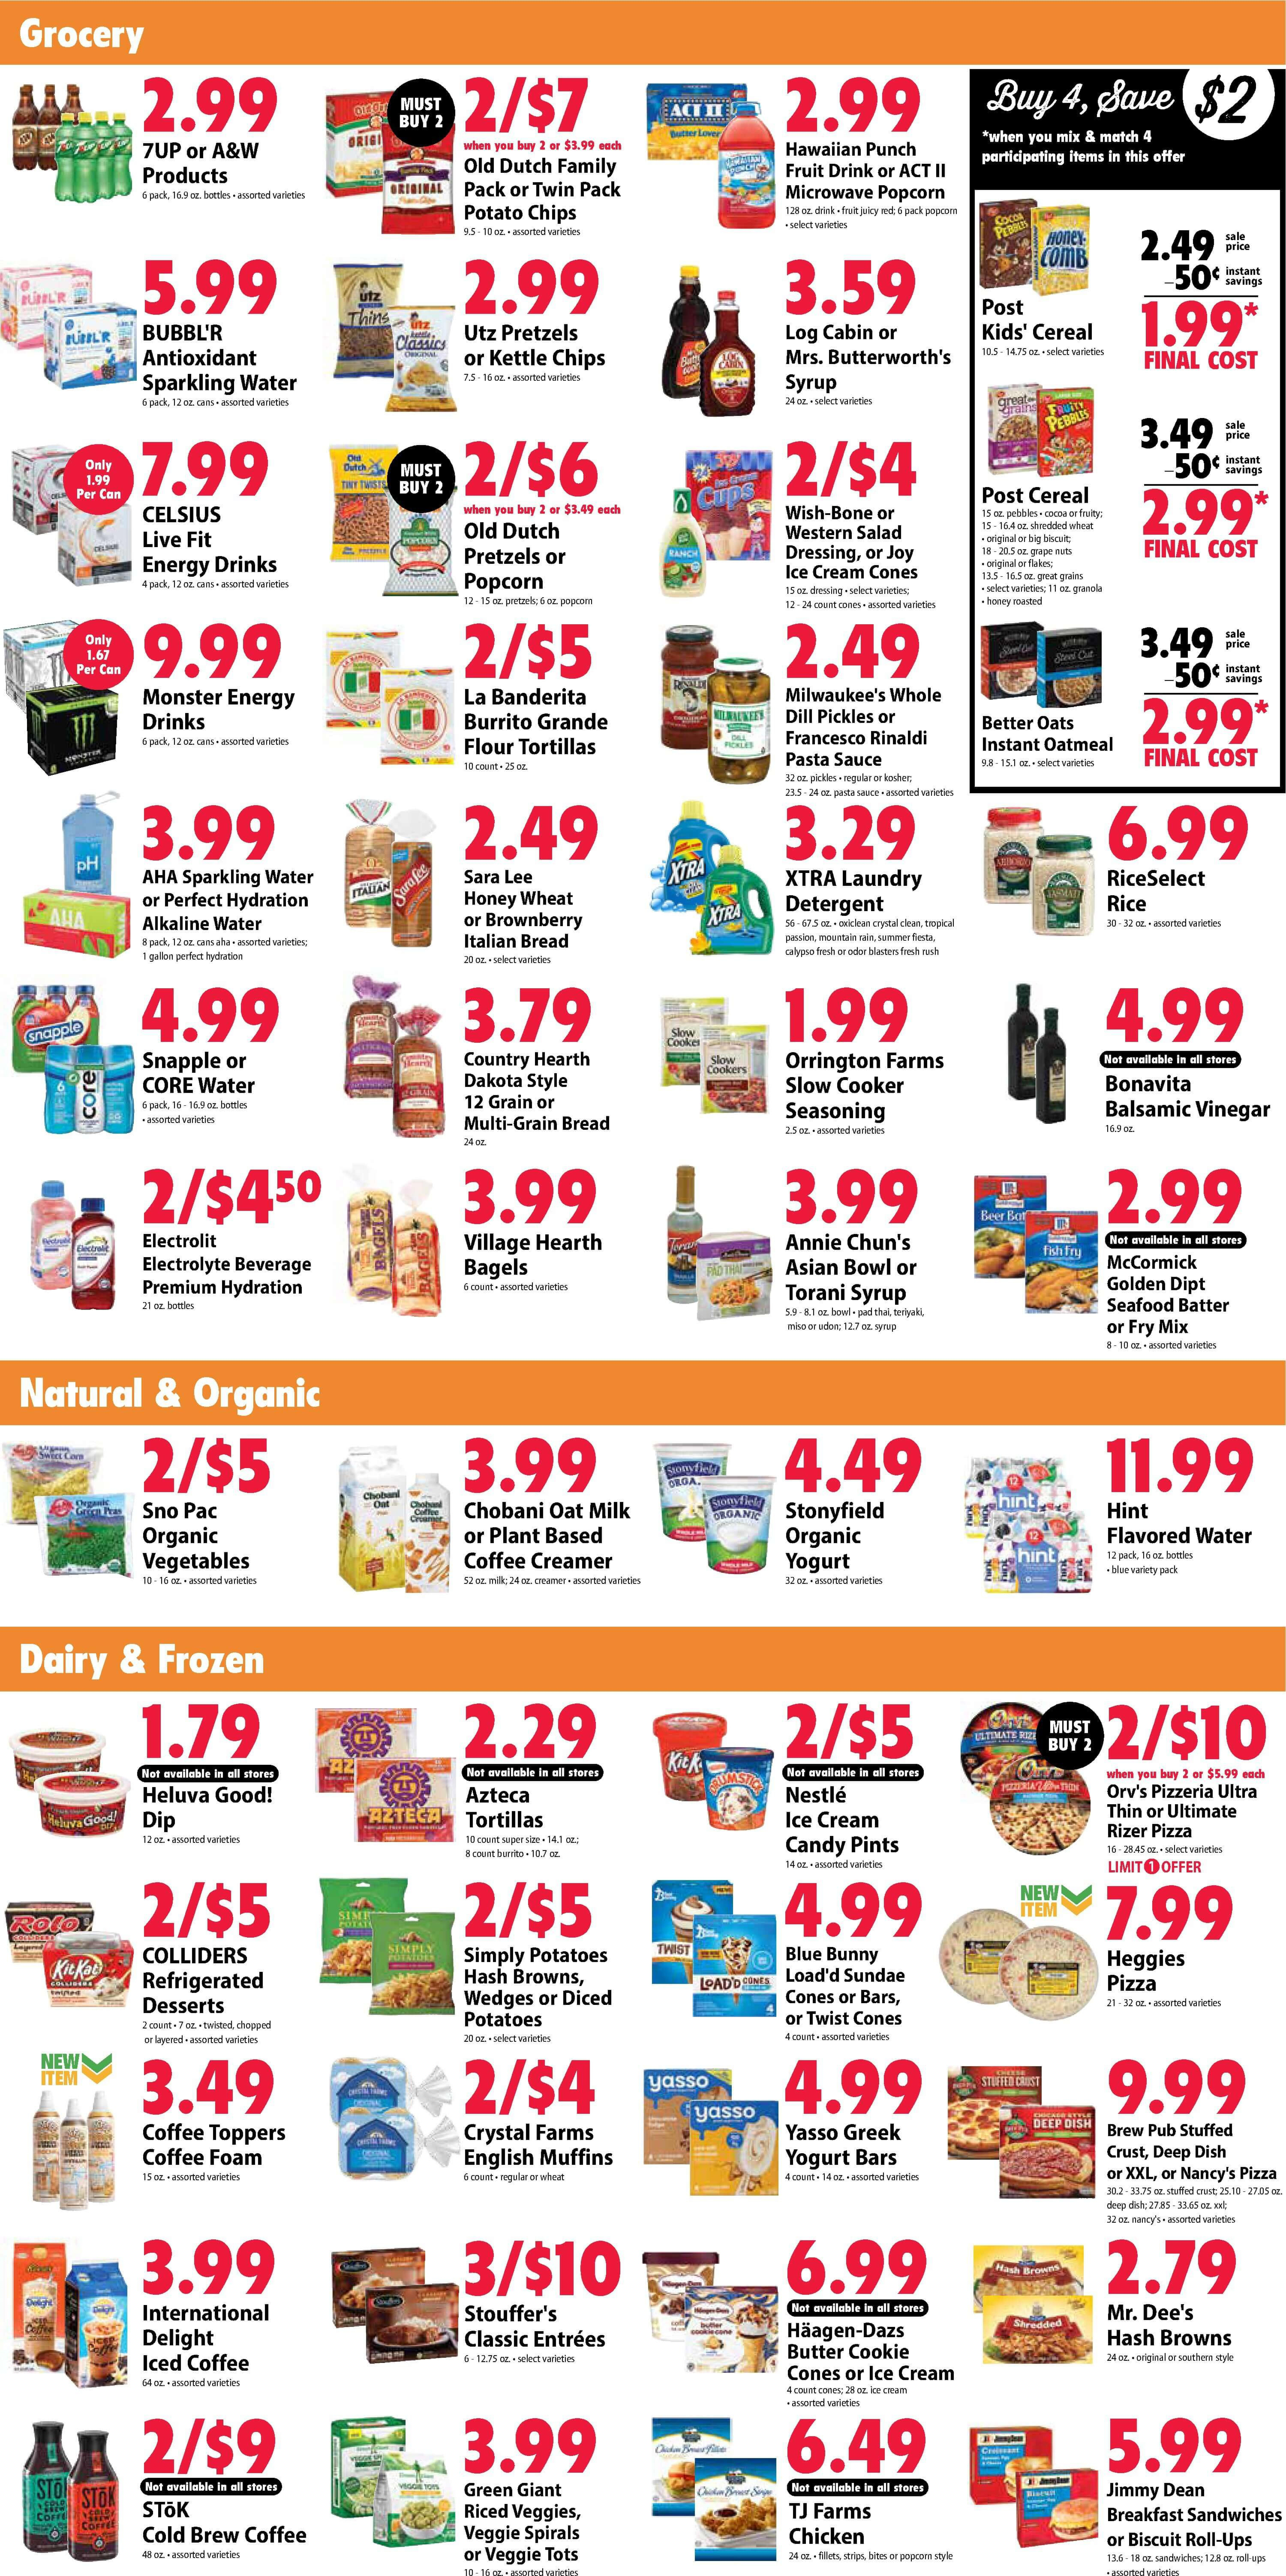 Festival Foods Weekly Ad from May 31